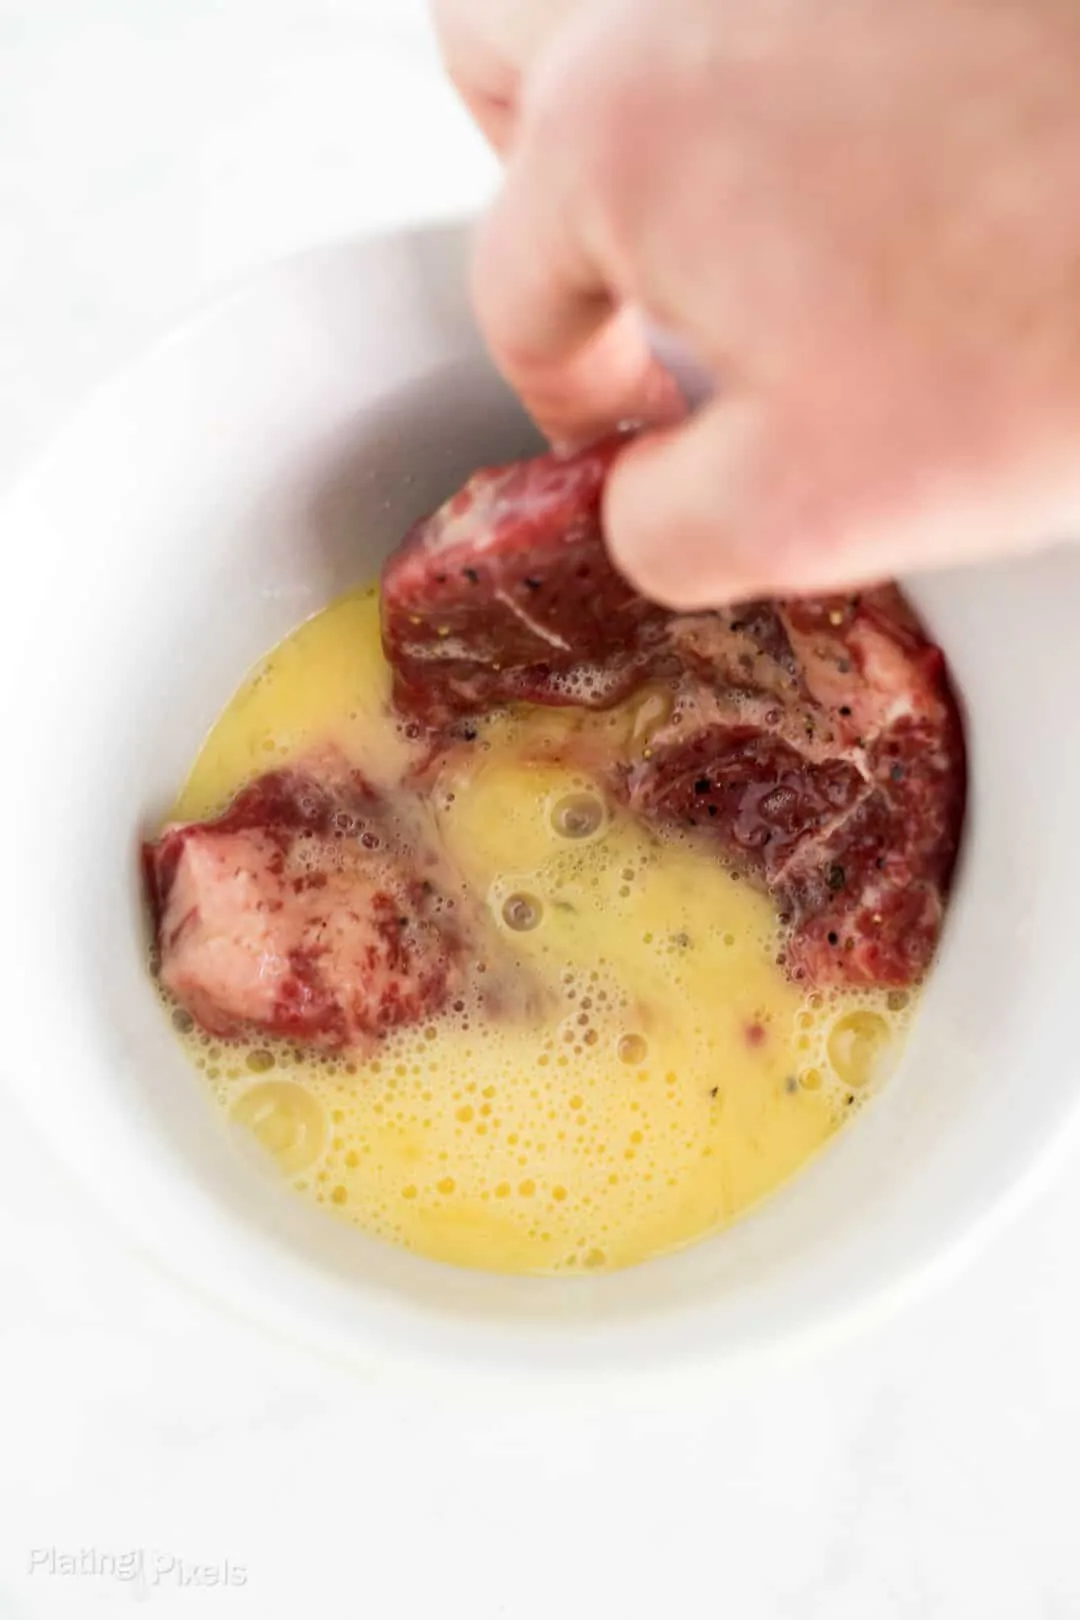 Process shot of dipping a cube steak into eggs